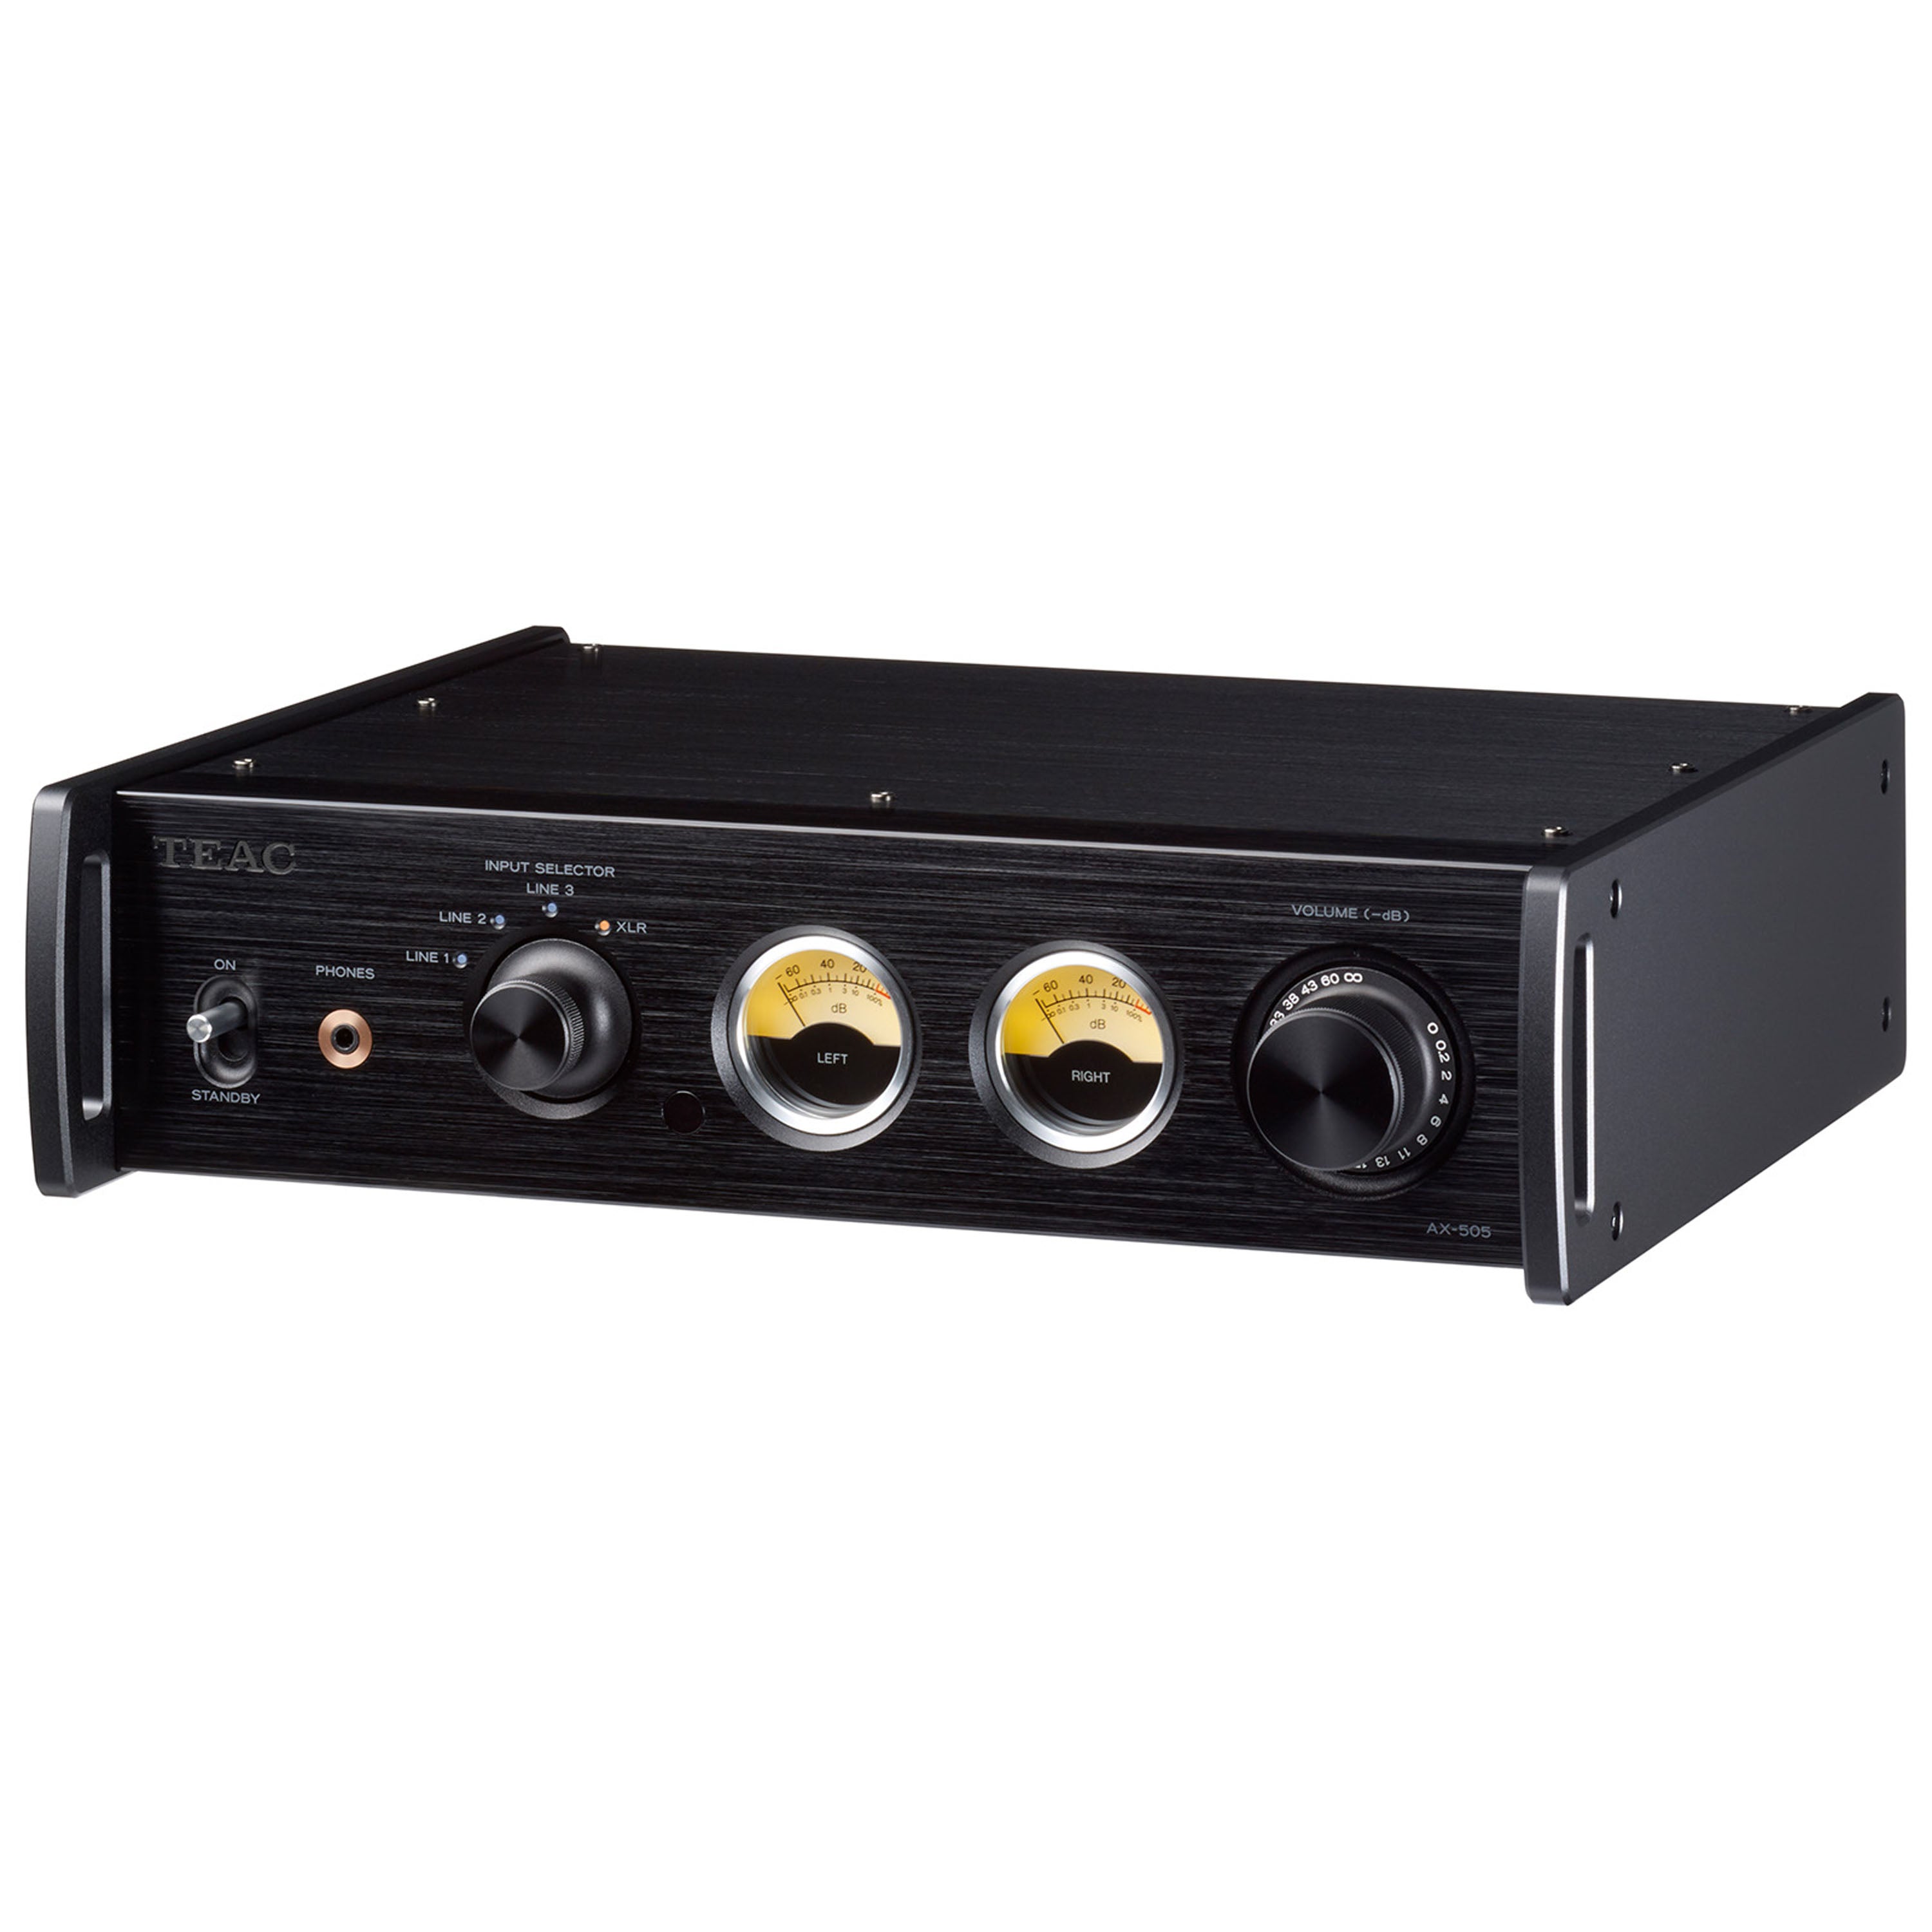 TEAC AX-505 Stereo Integrated Amplifier (Black)